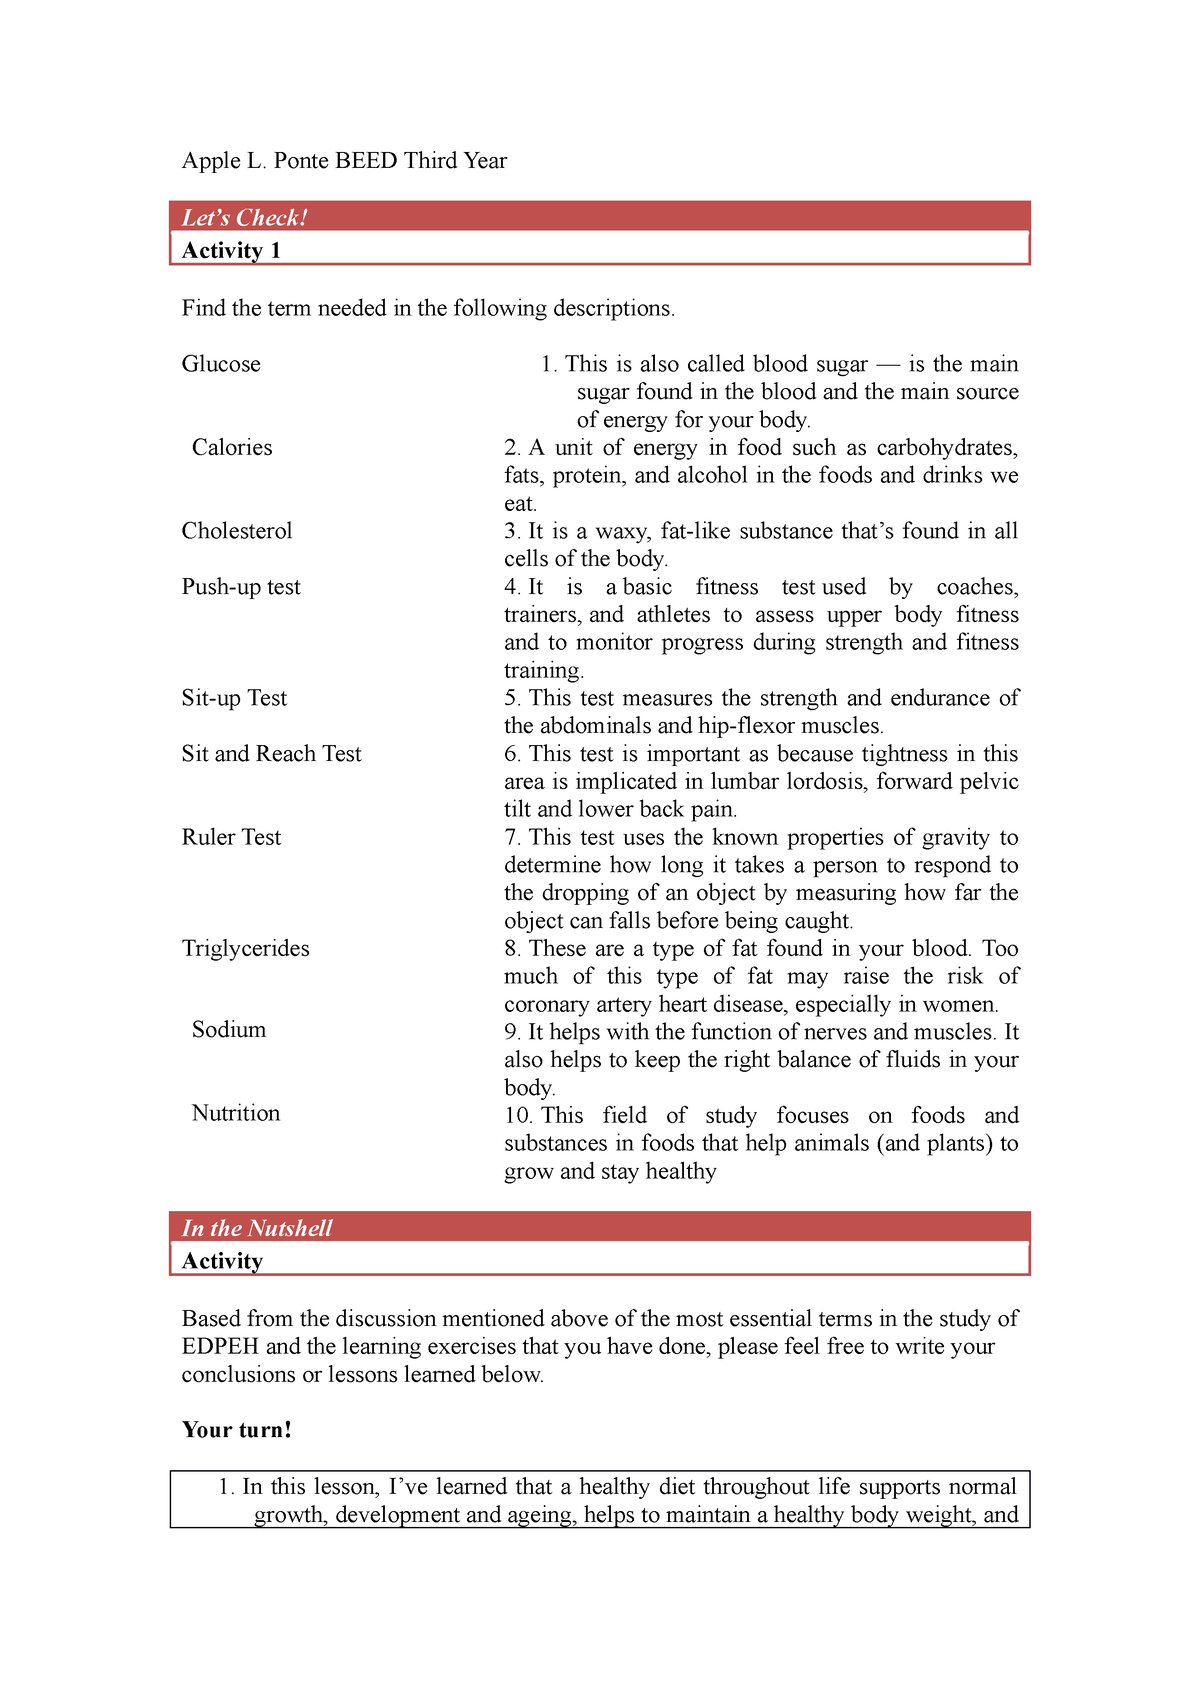 Apple L. Ponte (Activity 2) - Apple L. Ponte BEED Third Year Let’s ...